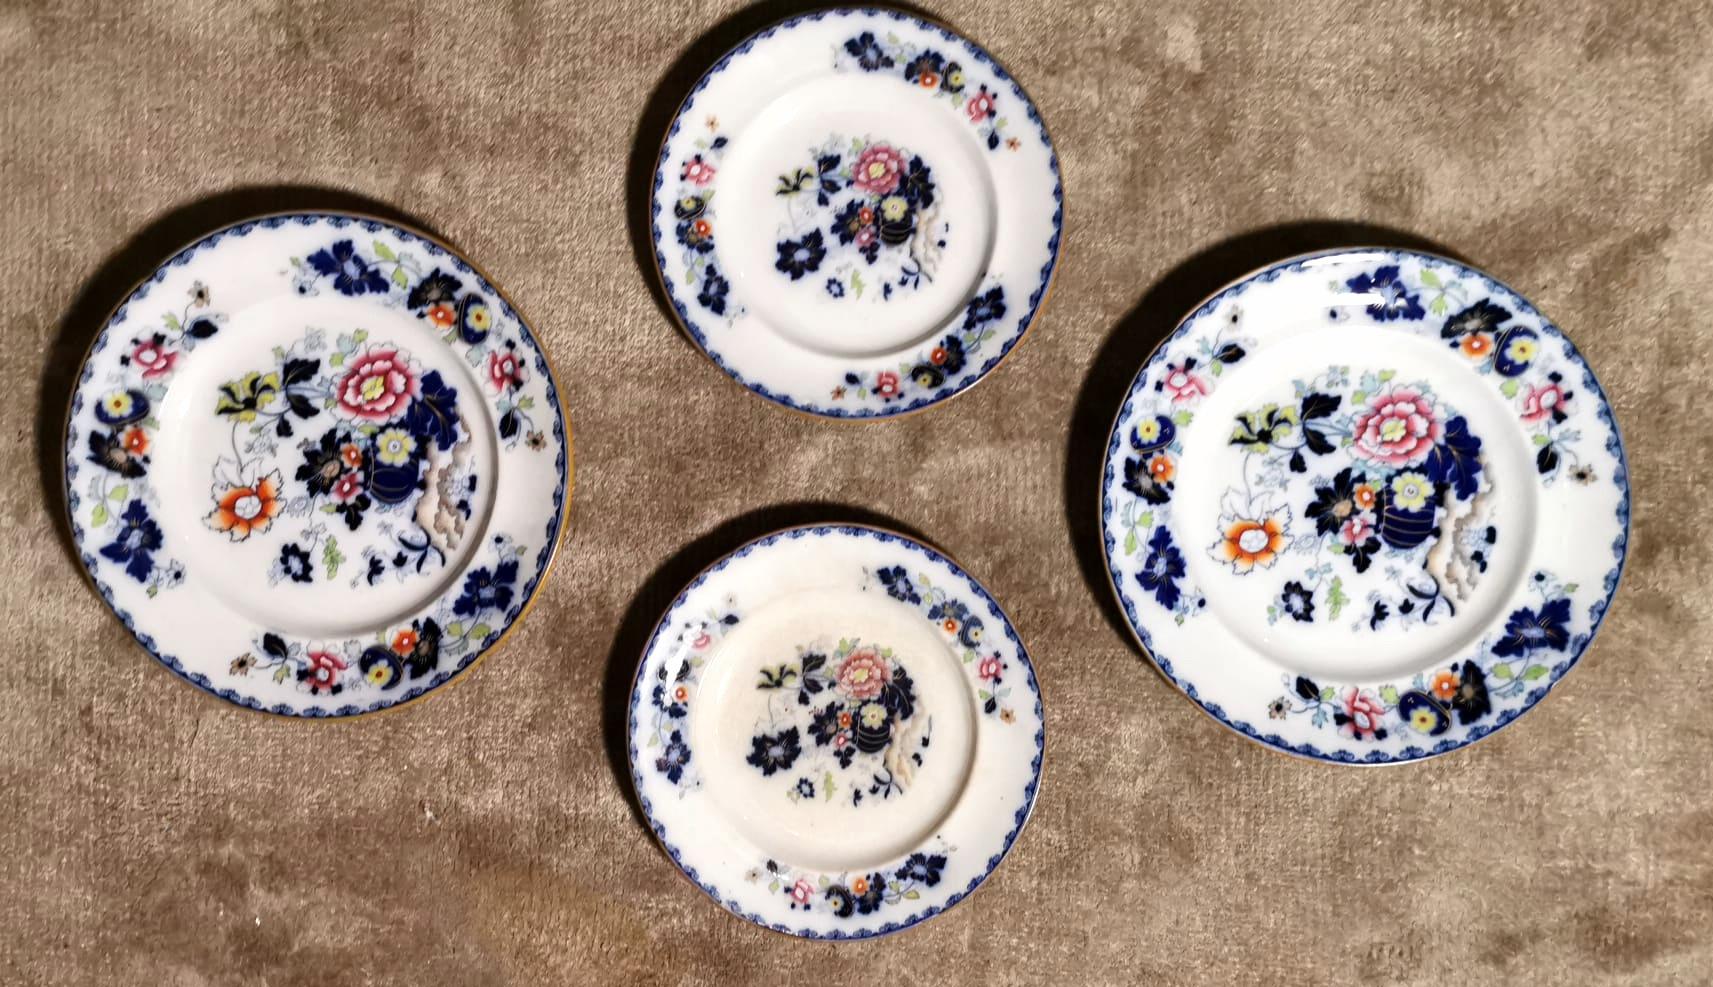 We kindly suggest you read the whole description, as with it we try to give you detailed technical and historical information to guarantee the authenticity of our items.
Refined and elegant English decorative ceramic plates; the set consists of two